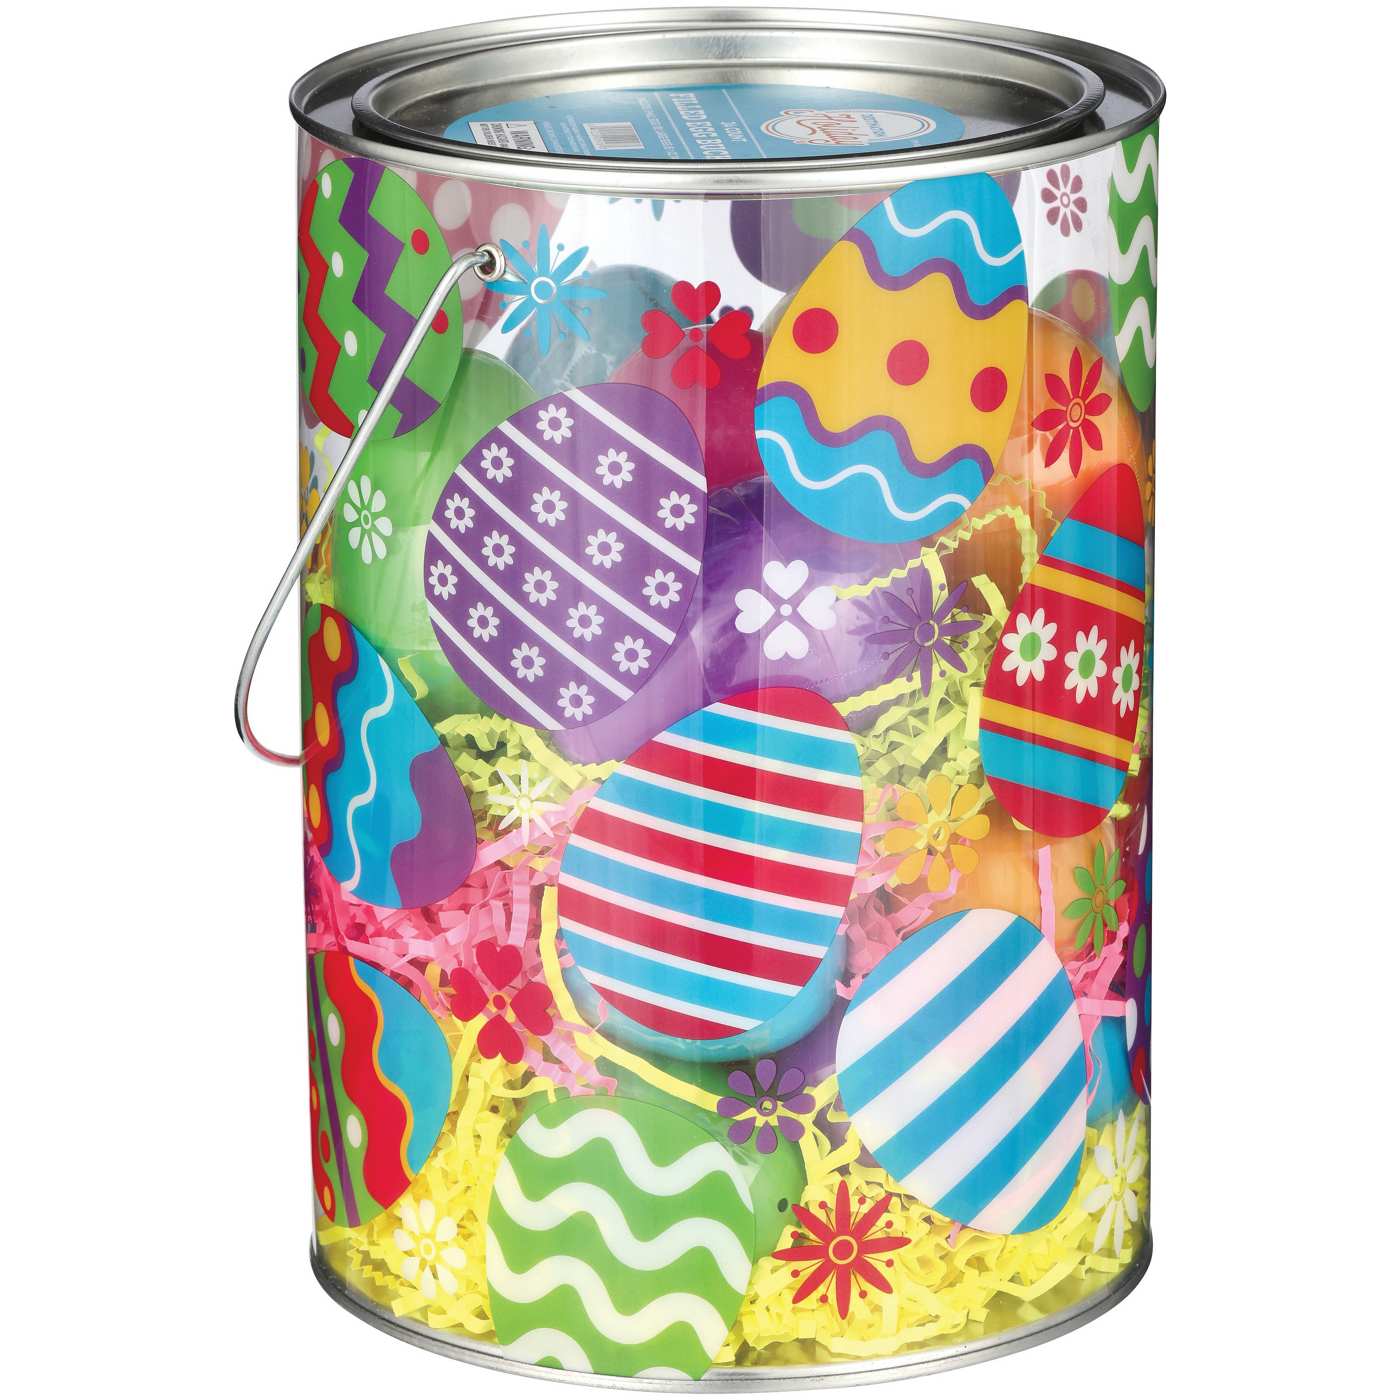 Destination Holiday Easter Filled Egg Bucket - Shop Party Decor at